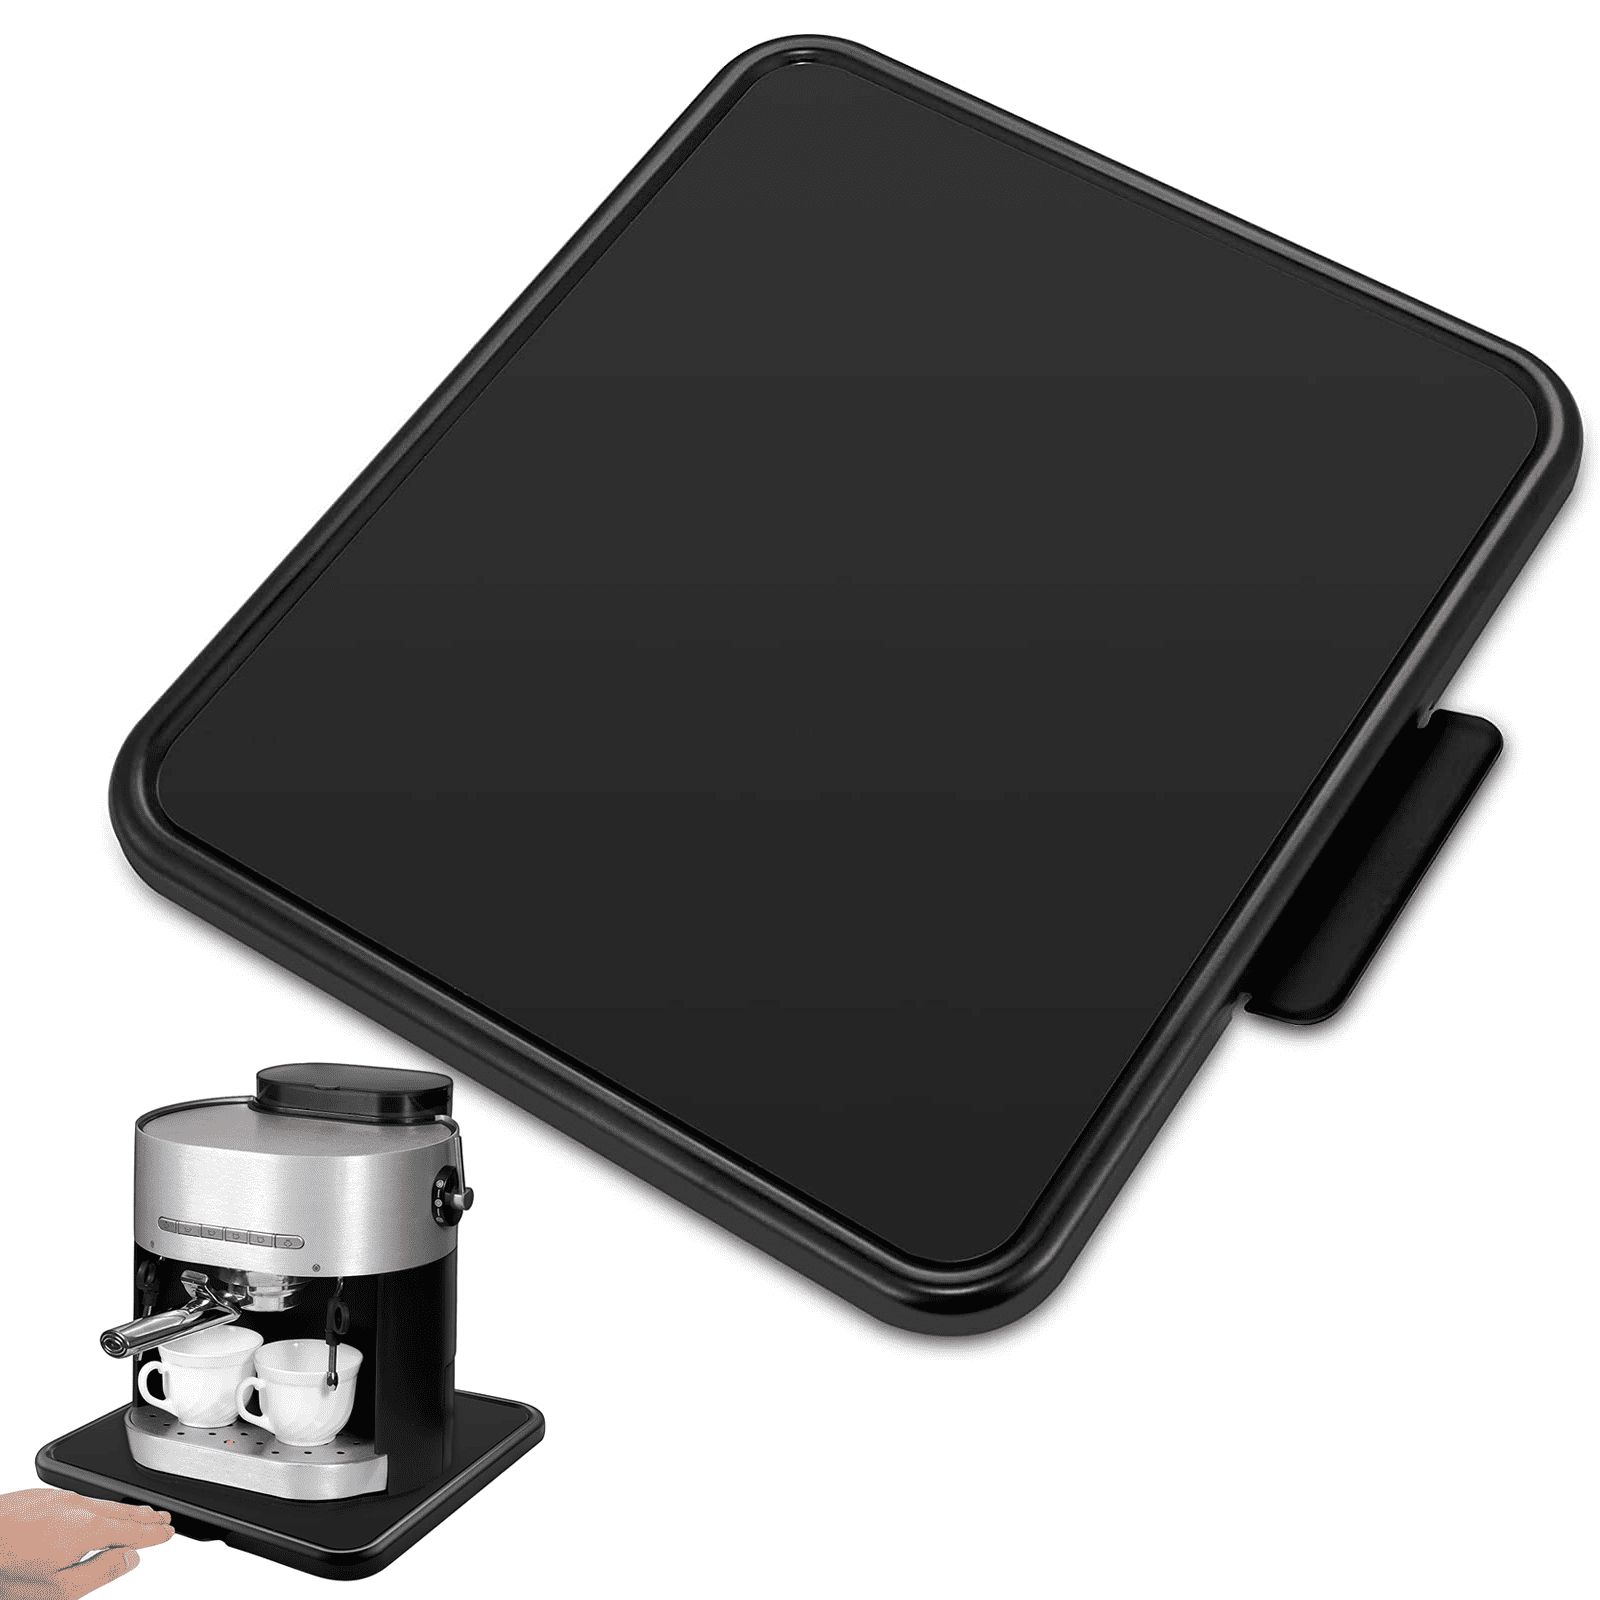 HauSun Handy Sliding Tray Sliding Tray Mat for Coffee Maker,Kitchen Appliance  Moving Caddy,Countertop Stoage for Air Fryer, Blender, Stand Mixer,Food  Processors,2 Sets